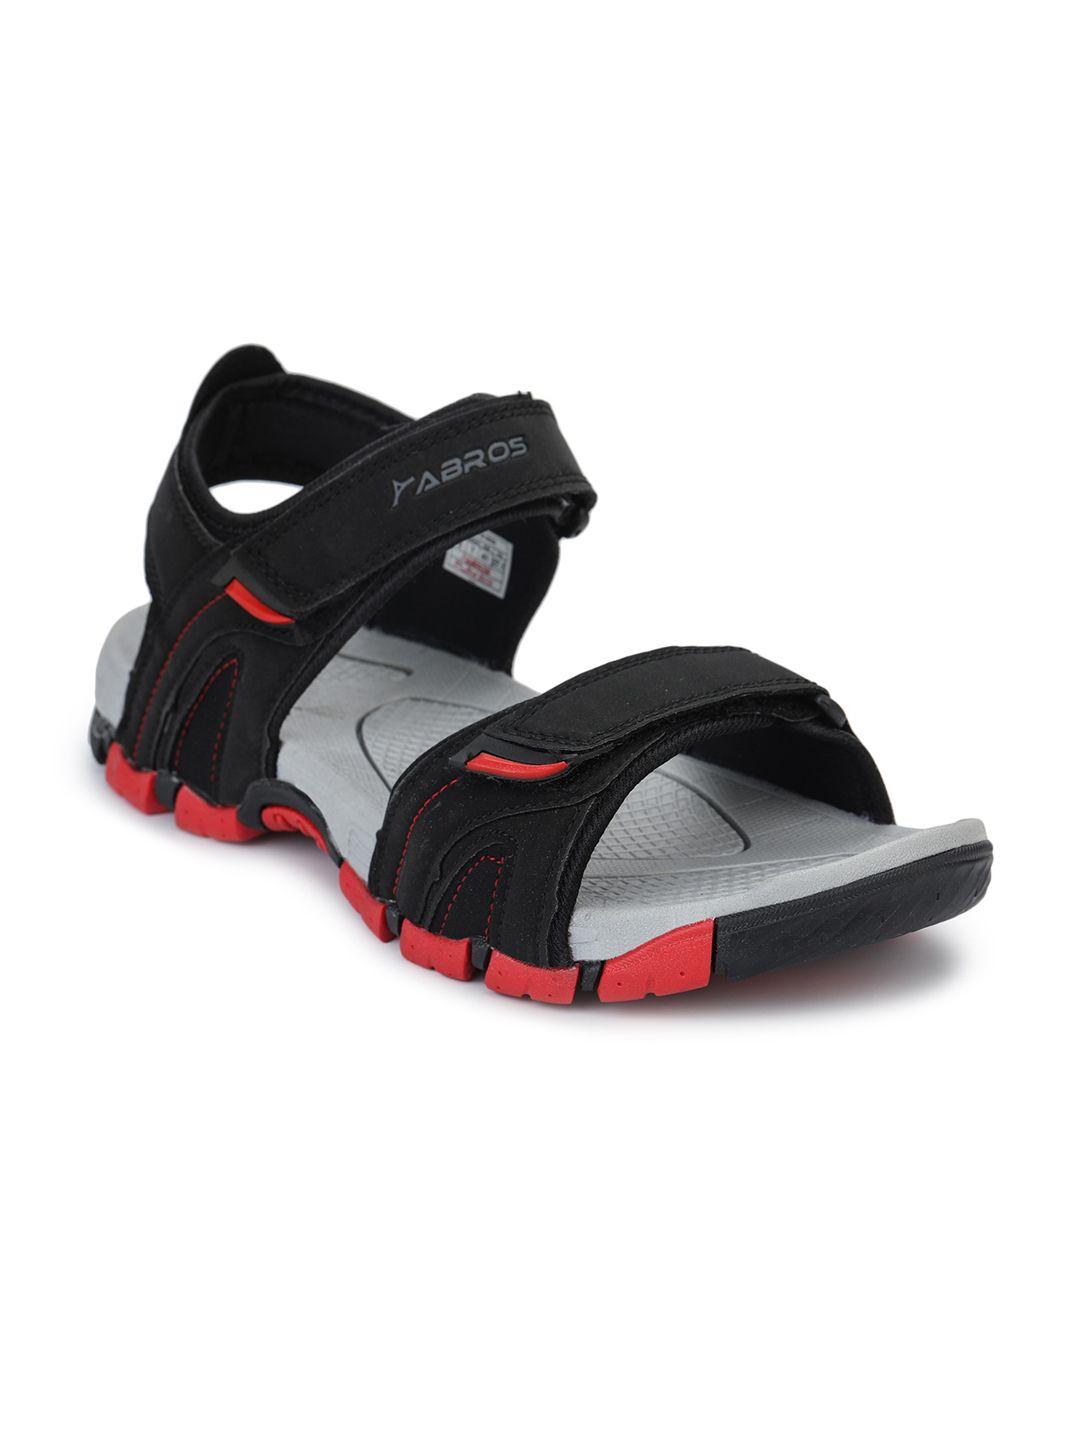 abros-men-black-&-red-solid-sports-sandals